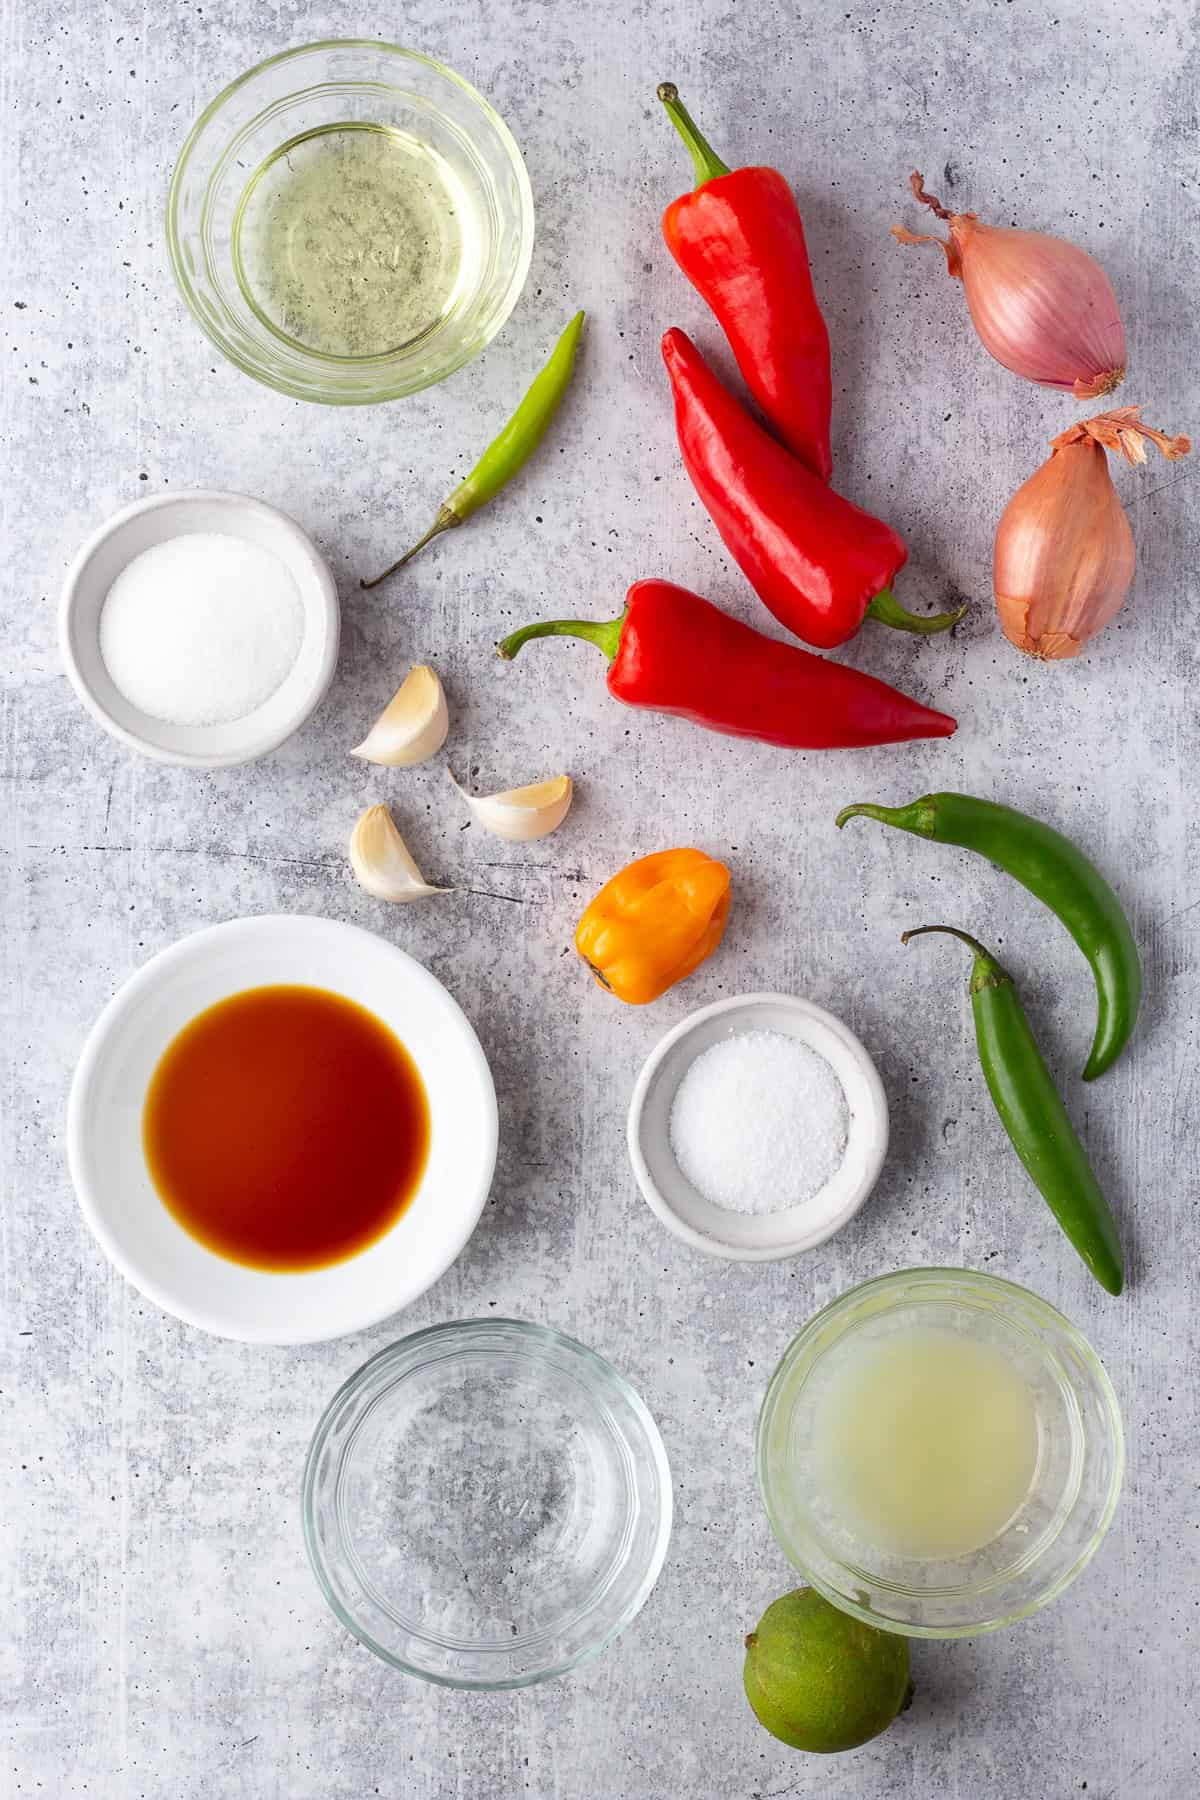 Ingredients for chili paste lined up on a counter, including peppers, garlic and oil.